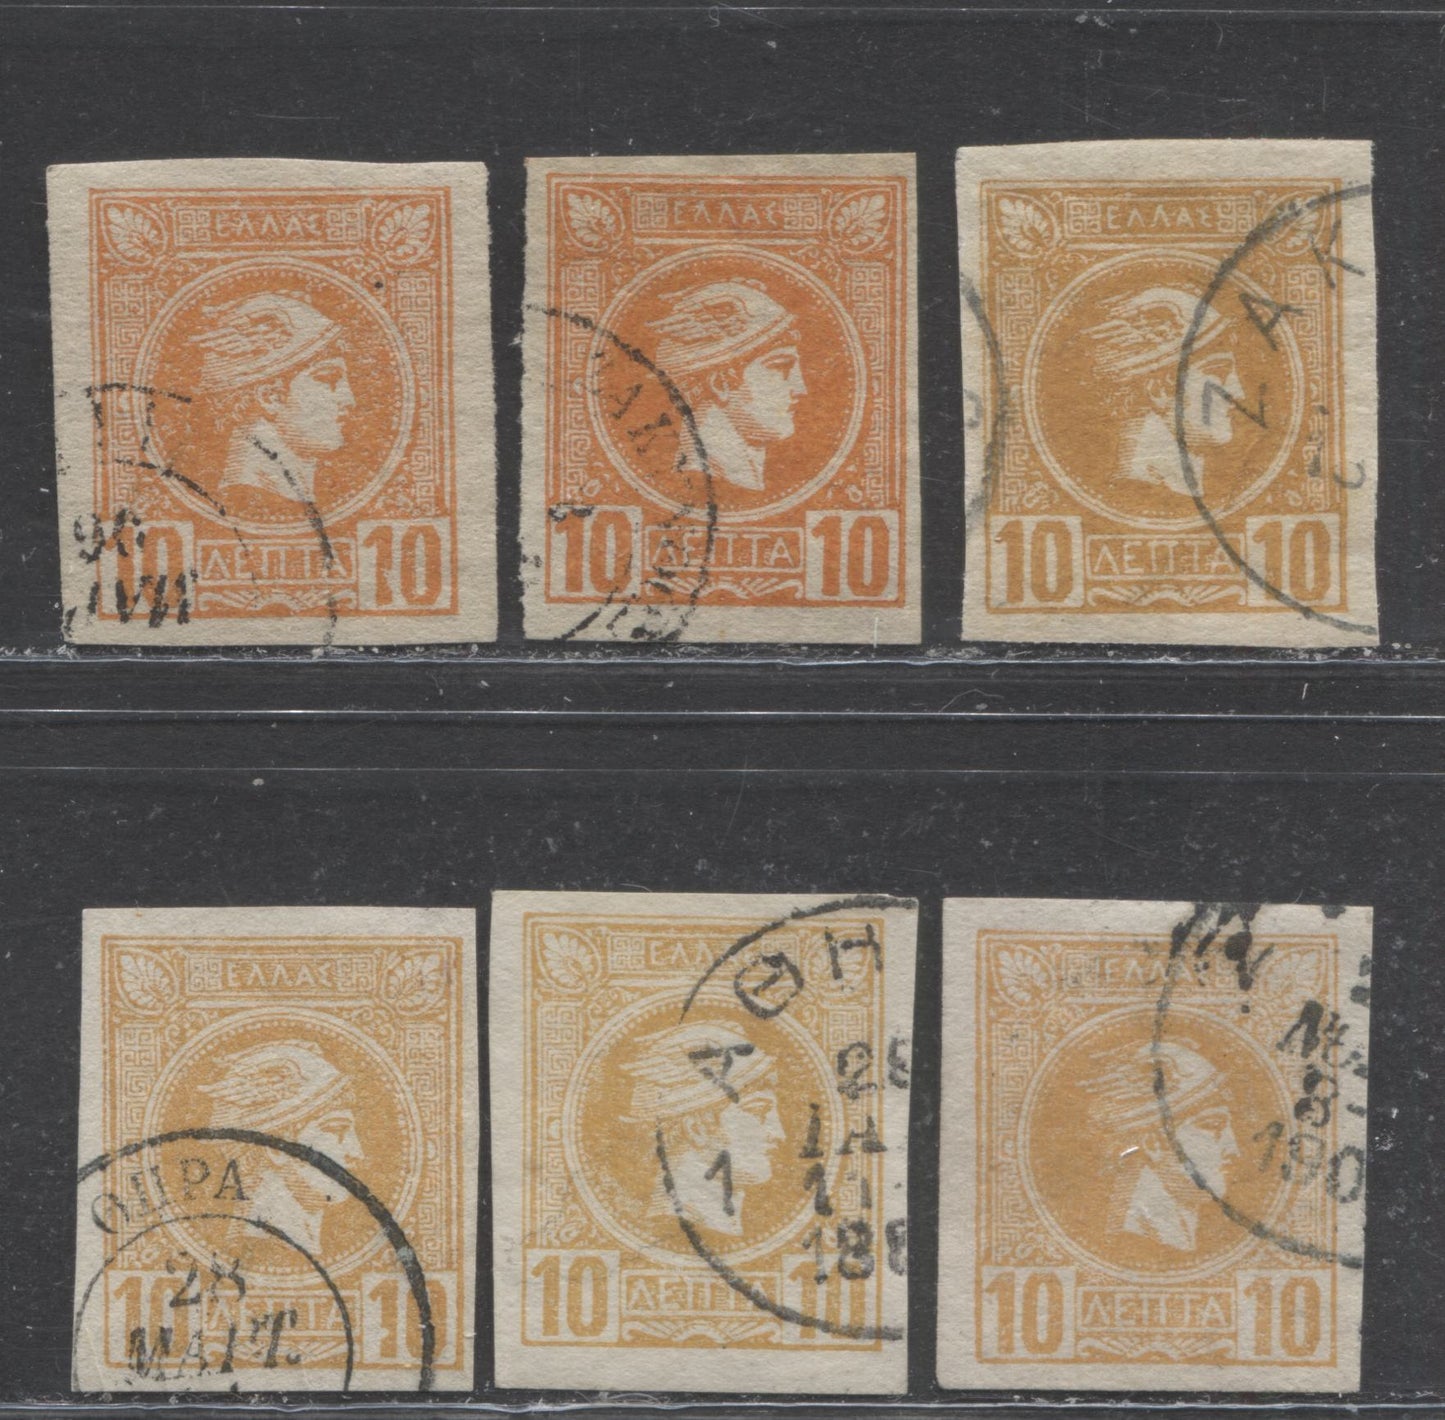 Lot 196 Greece SC#93-93b Yellow and Orange 1889-6-1895 Small Hermes Head Issue Printed in Athens, A VF Used Range Of Singles, Different Papers and Shades, 2022 Scott Classic Cat.$30 USD, Click on Listing to See ALL Pictures